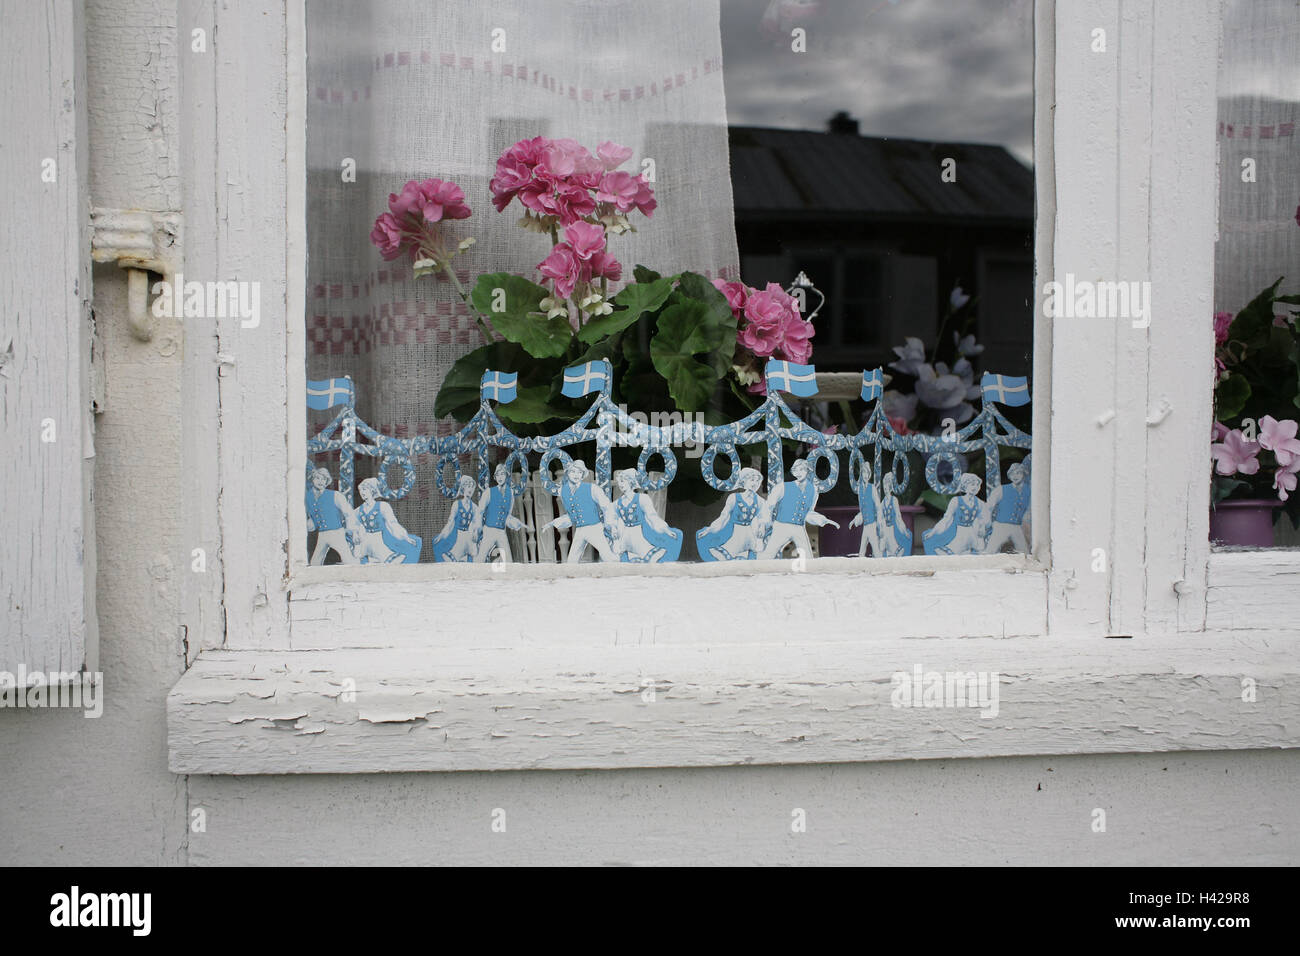 Wooden house, window, detail, decoration, in Swedish, geraniums, pink, Sweden, Norrland, Norrbotten, Lulea, Gammelstad, house, residential house, window pane, flowers, garland, national flags, Mittsommer, Stock Photo